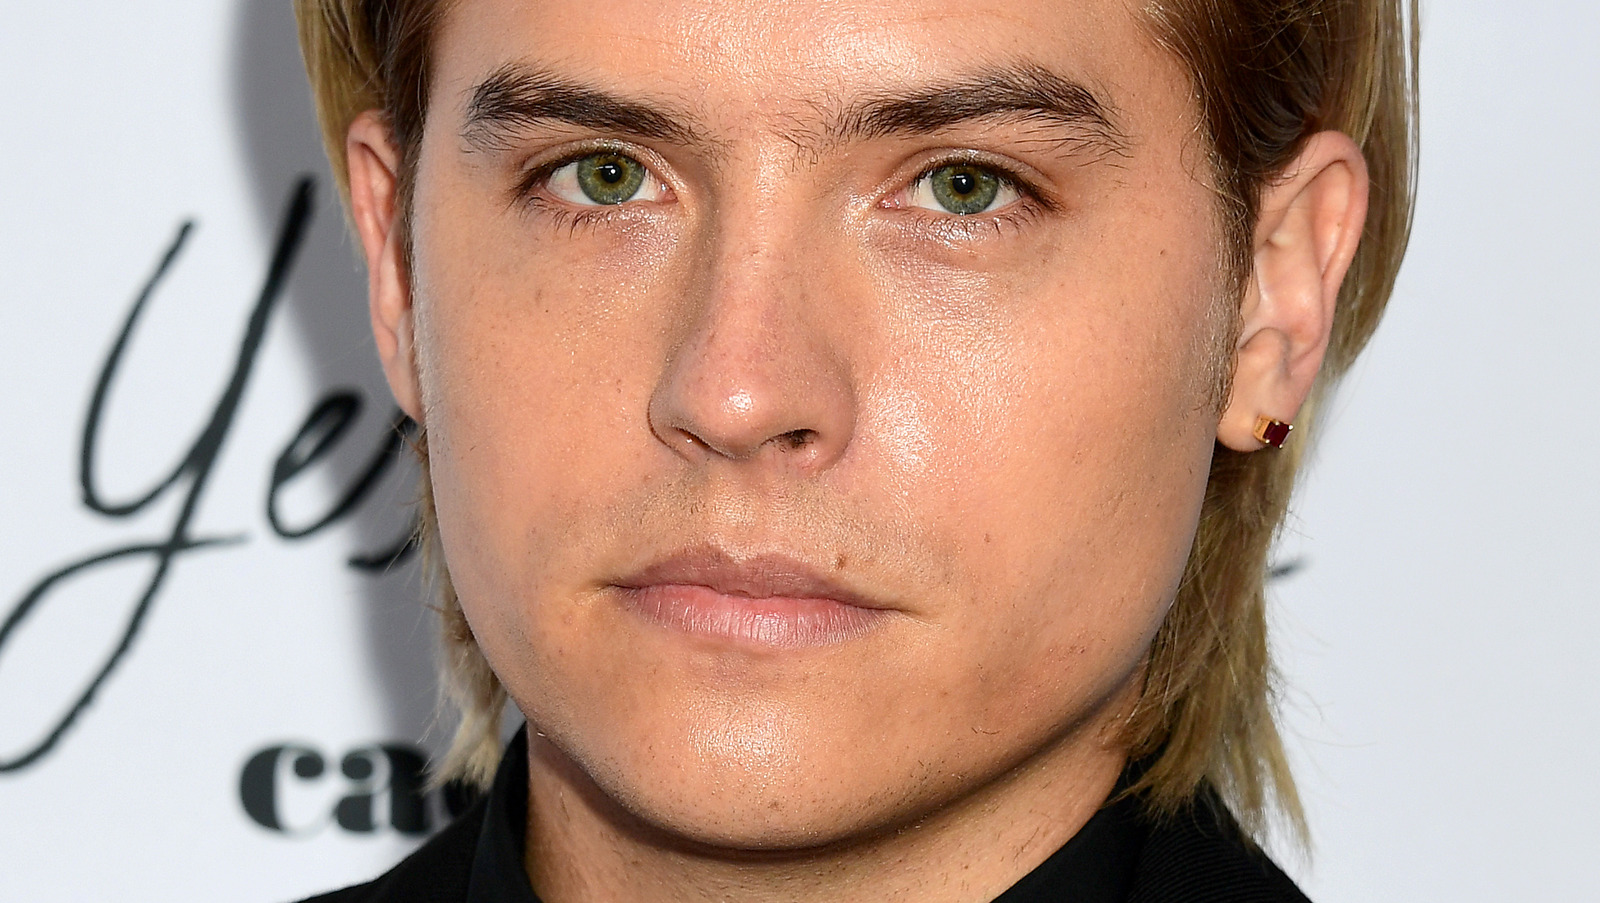 Dylan Sprouse Quietly Worked A Regular Job After His Disney Fame